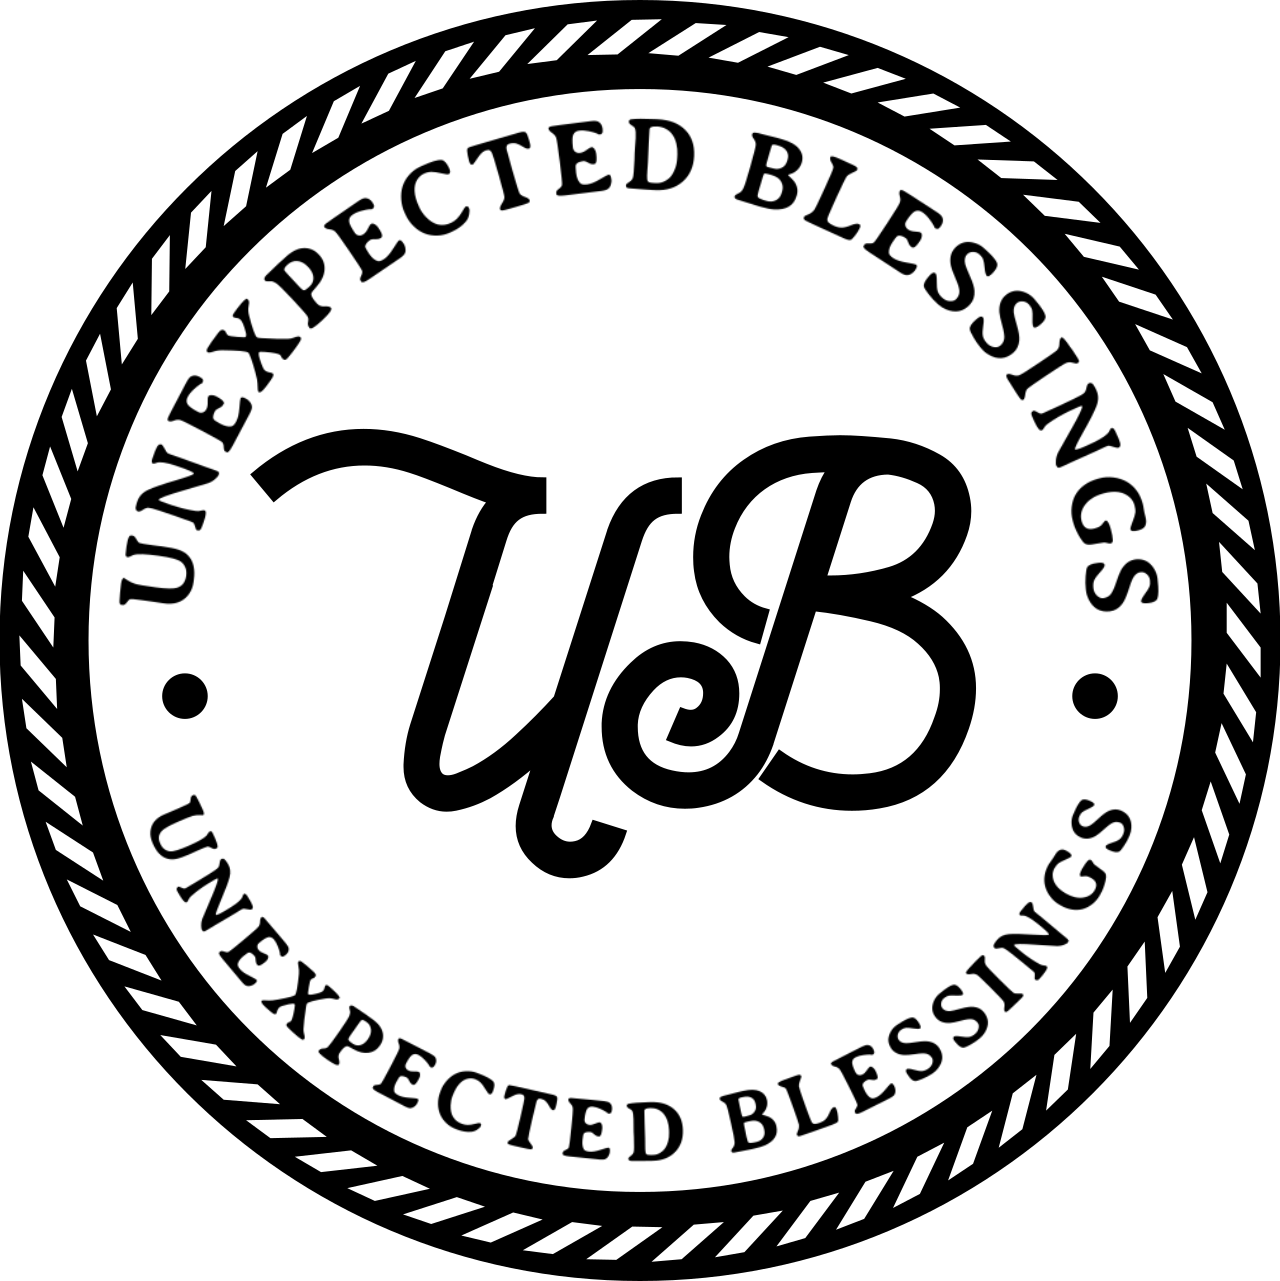 UNEXPECTED BLESSINGS's web page